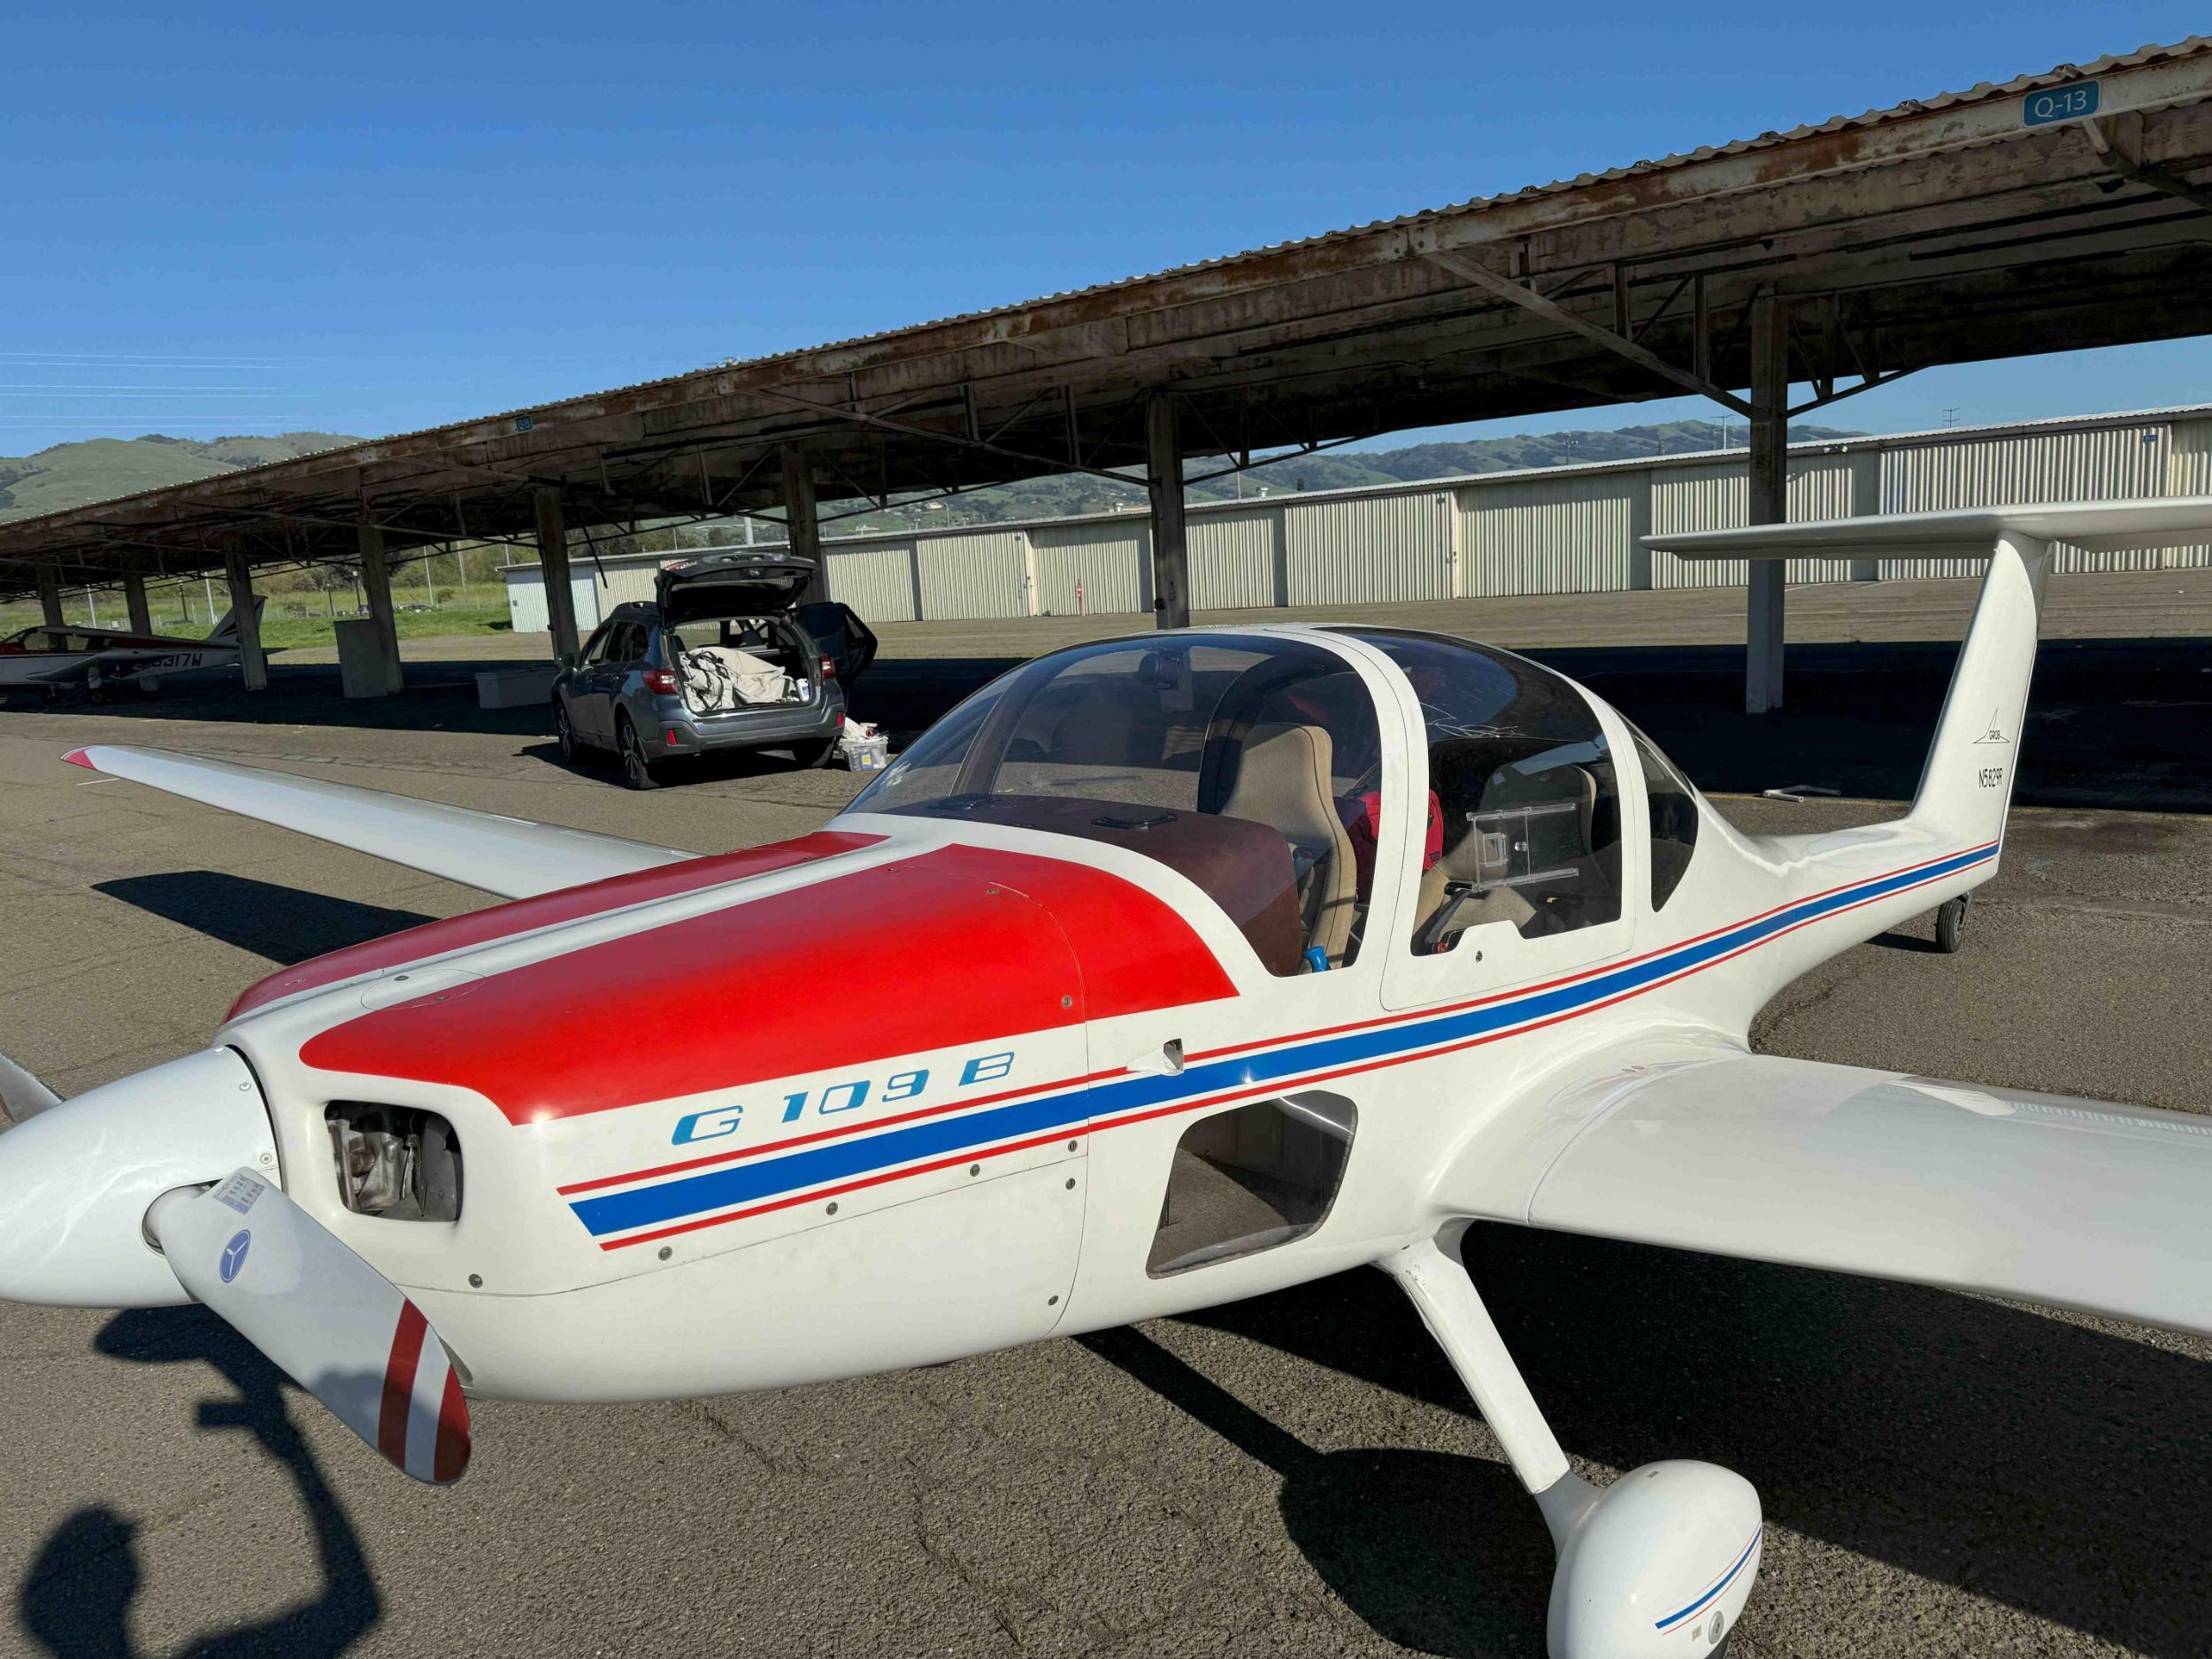 More information about "Grob109B Motorglider"